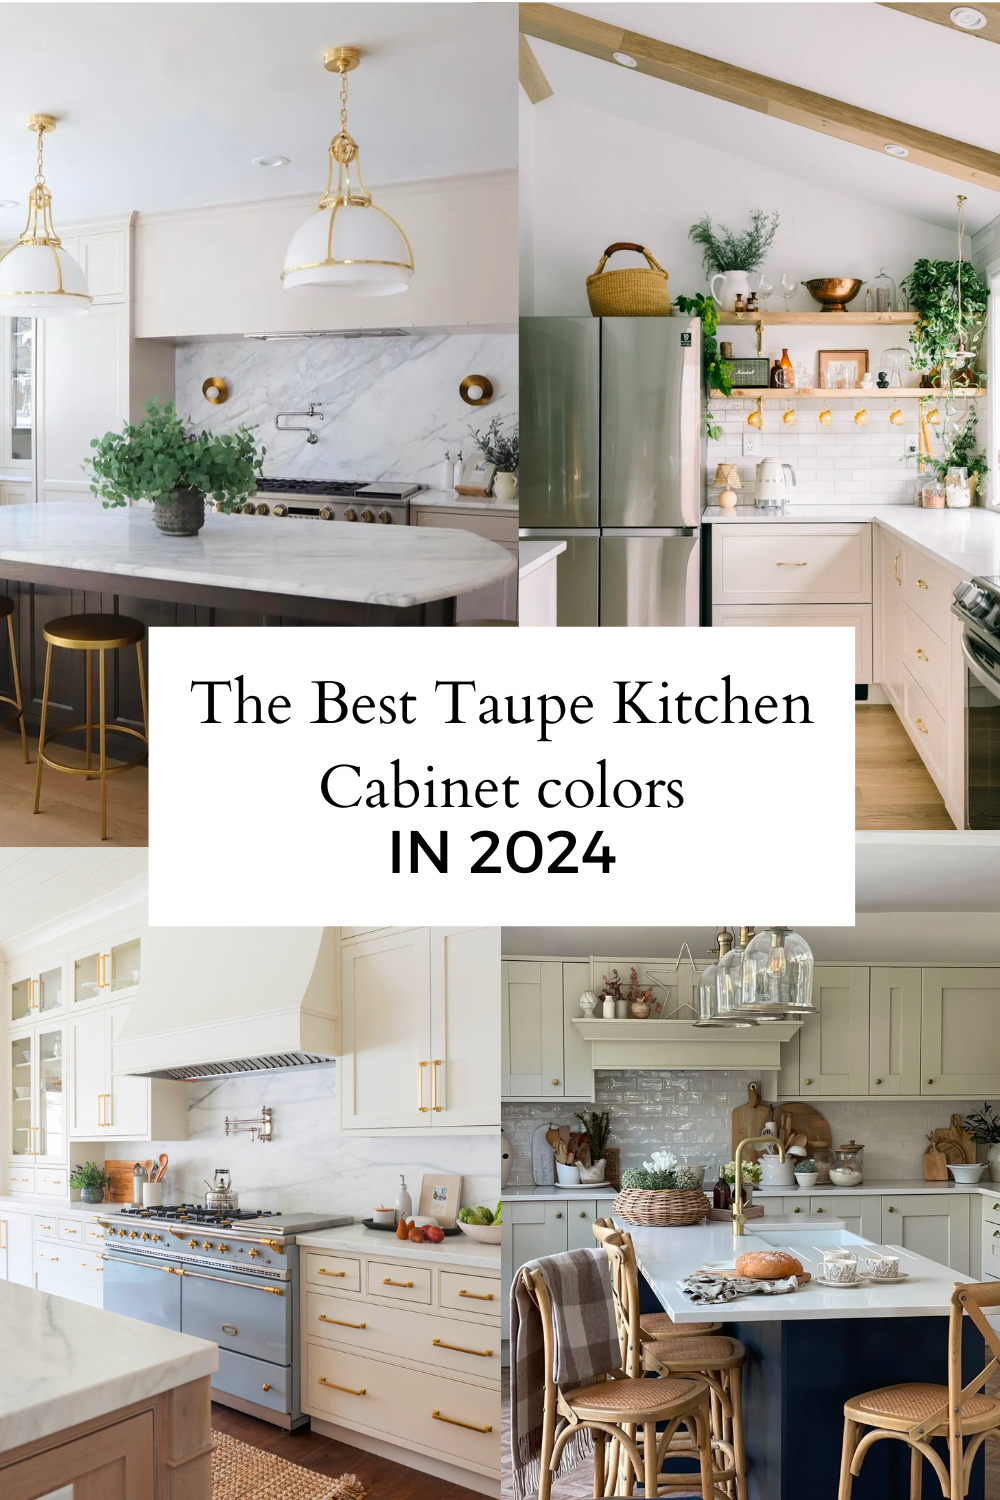 Taupe and Beige Kitchen Cabinets You’ll fall in Love With - Hana's ...